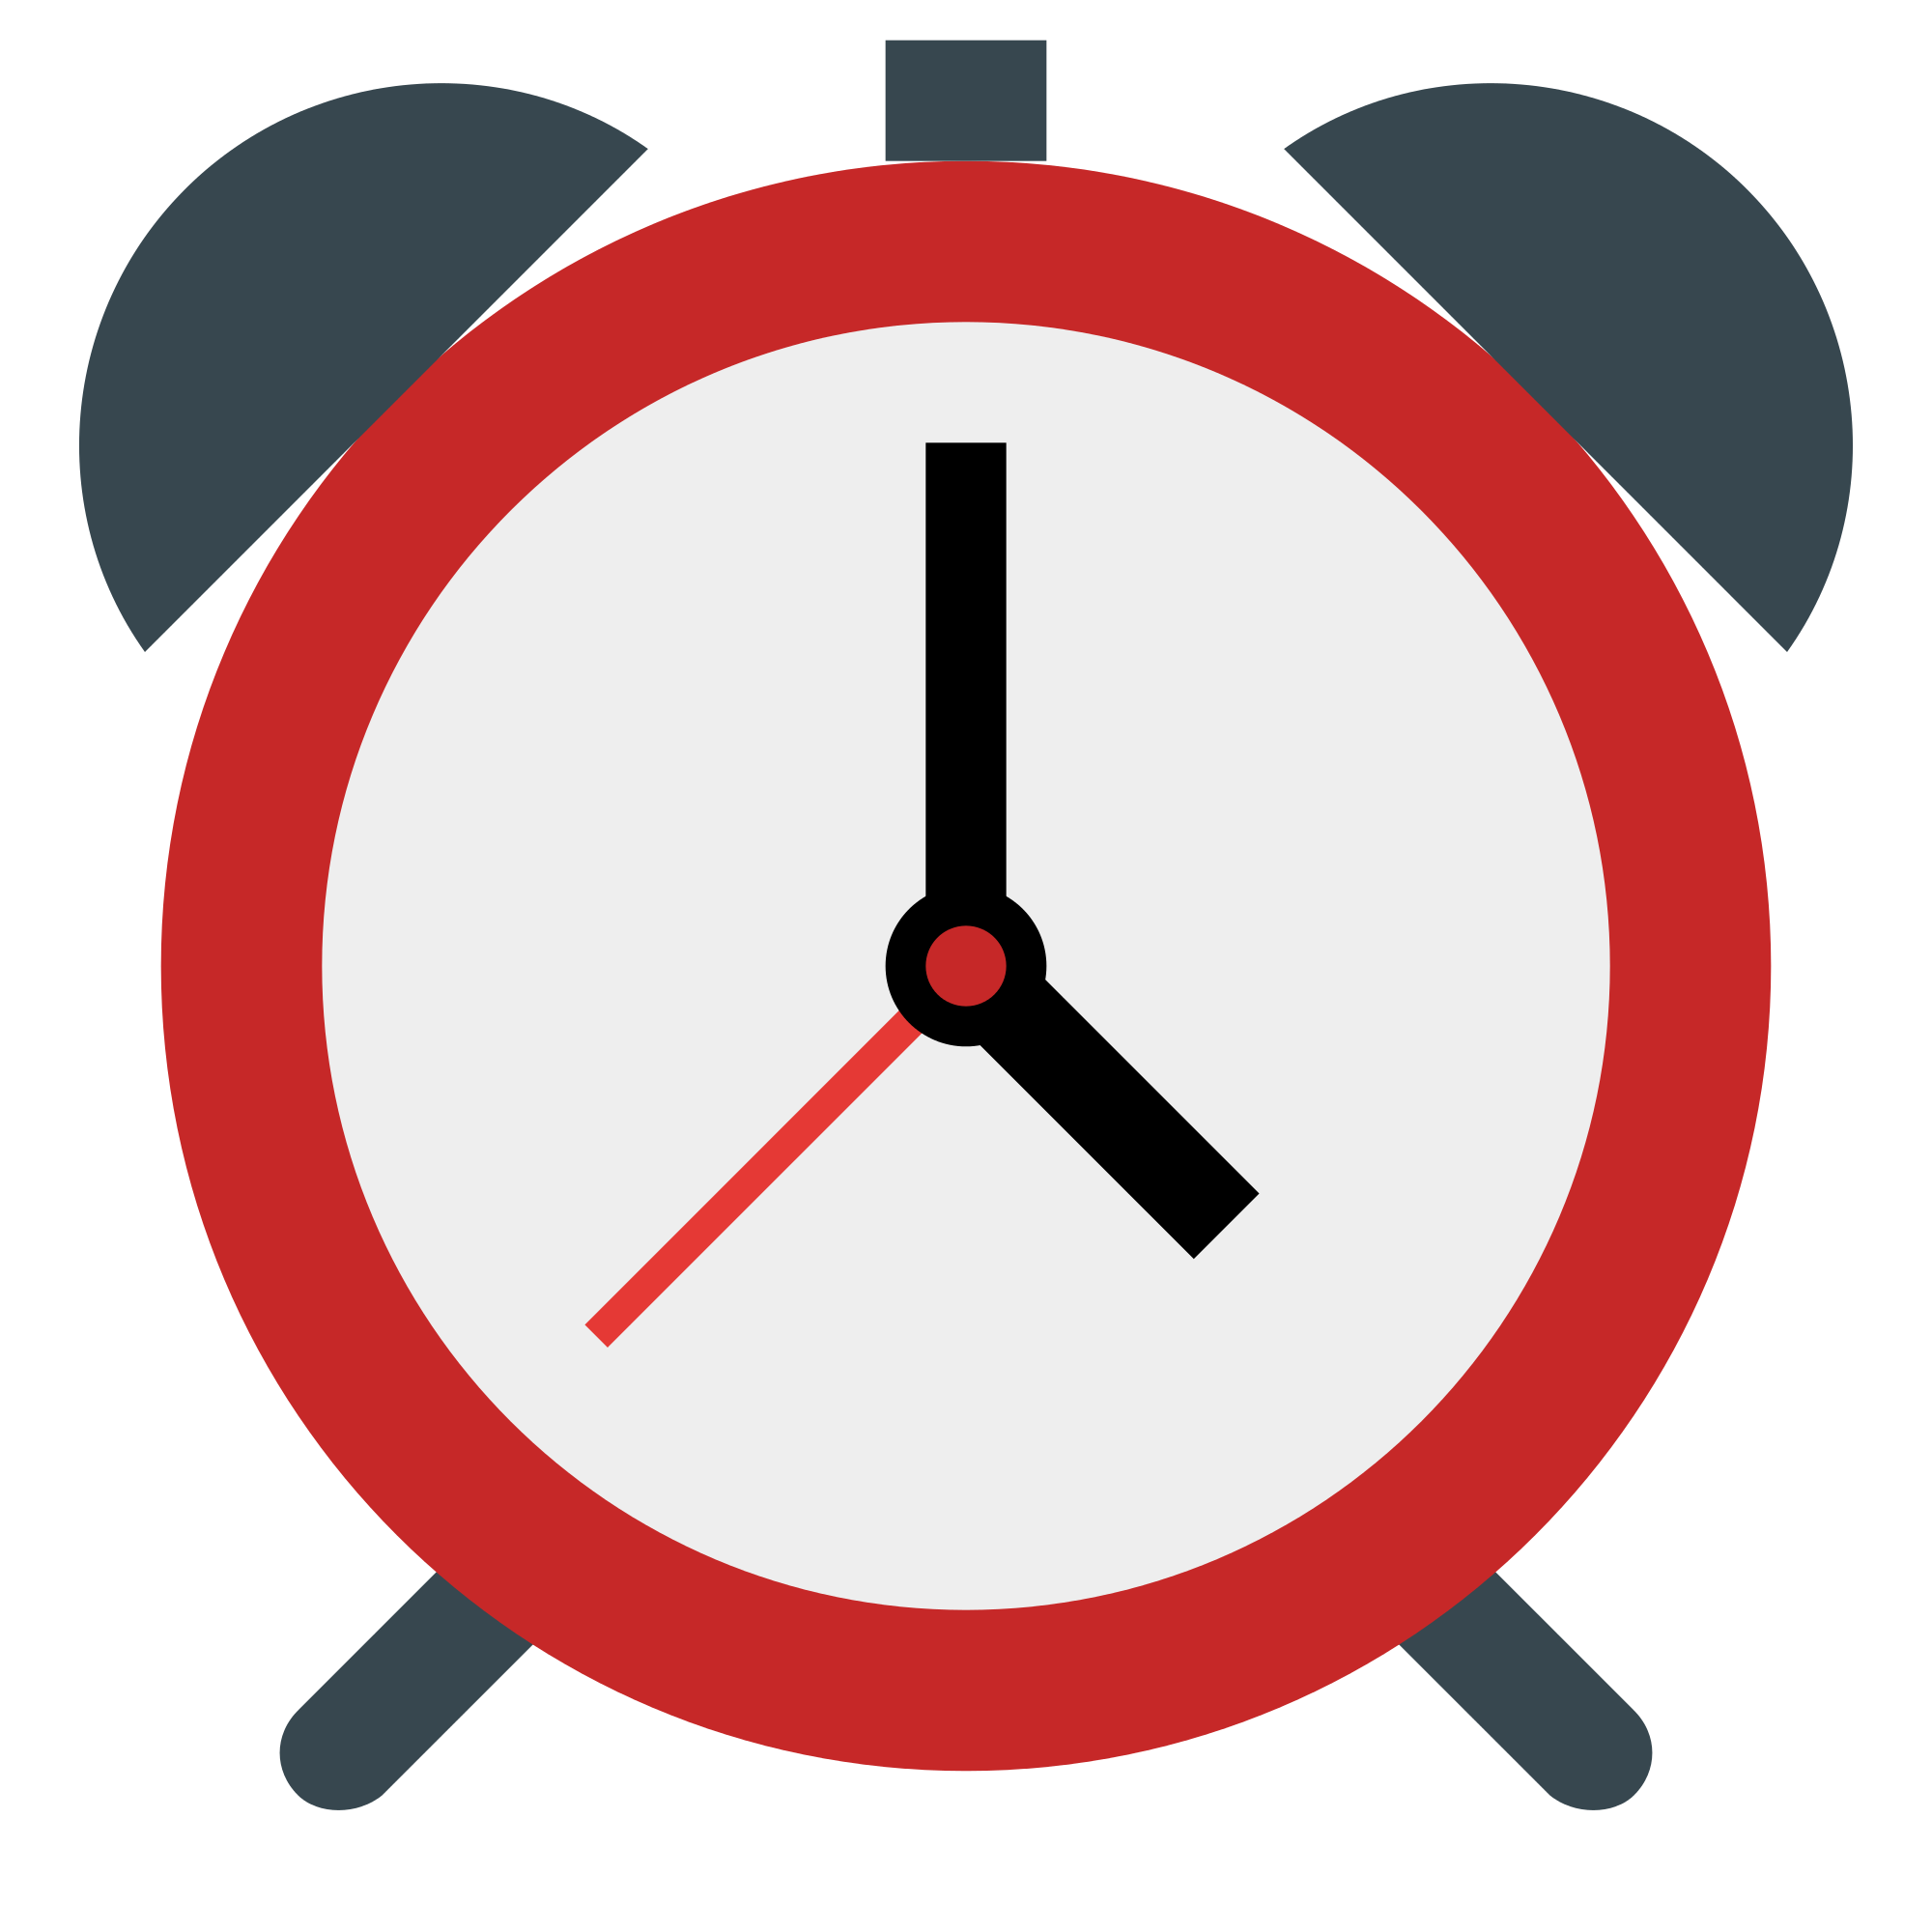 Oval clipart clock. Alarm png free download